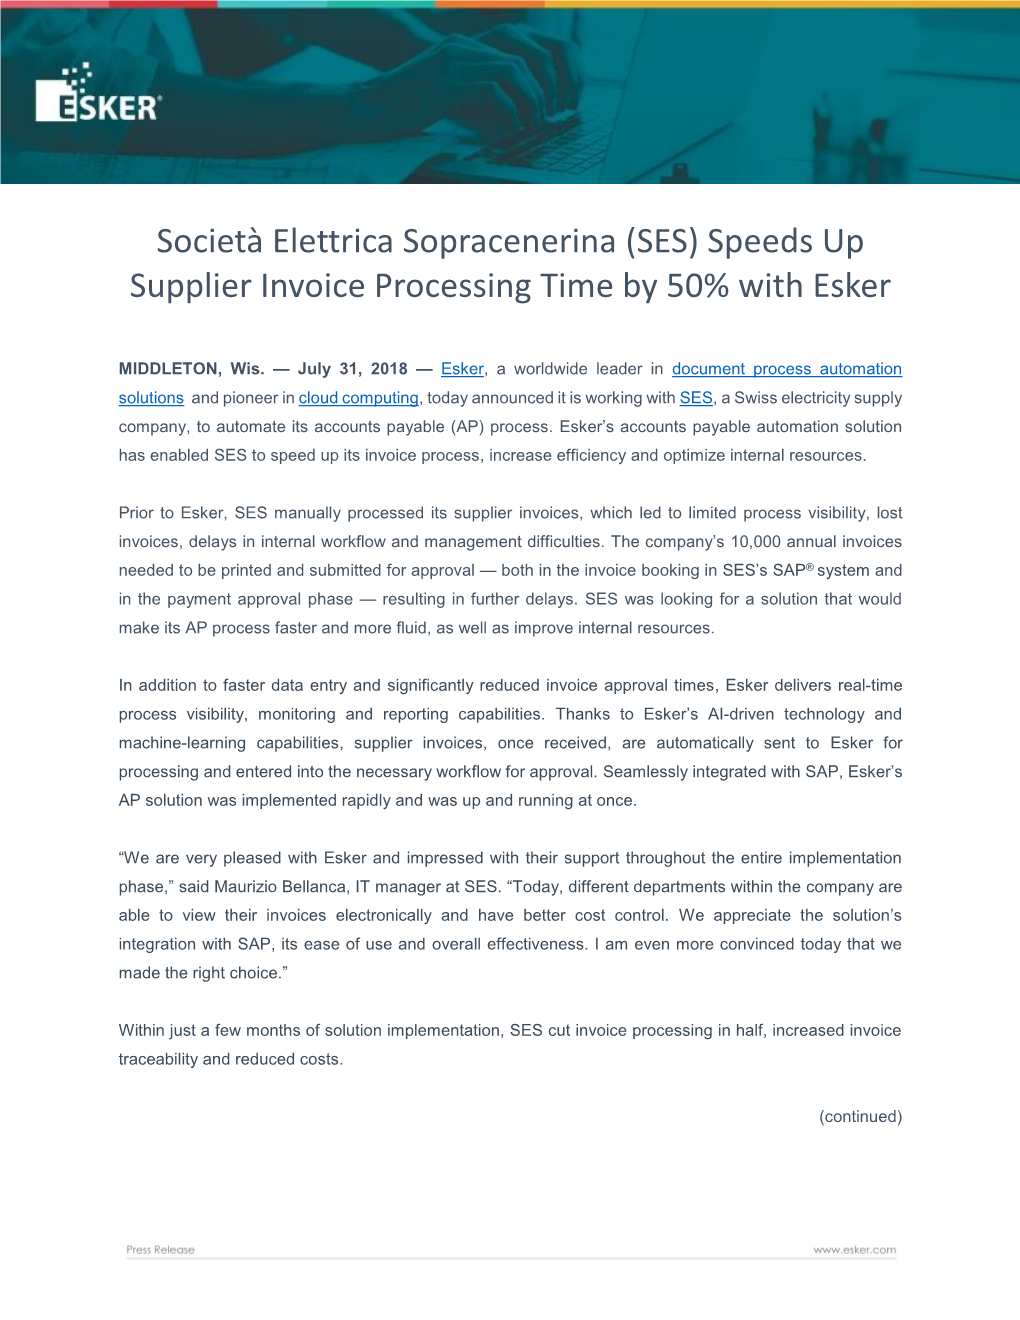 Società Elettrica Sopracenerina (SES) Speeds up Supplier Invoice Processing Time by 50% with Esker